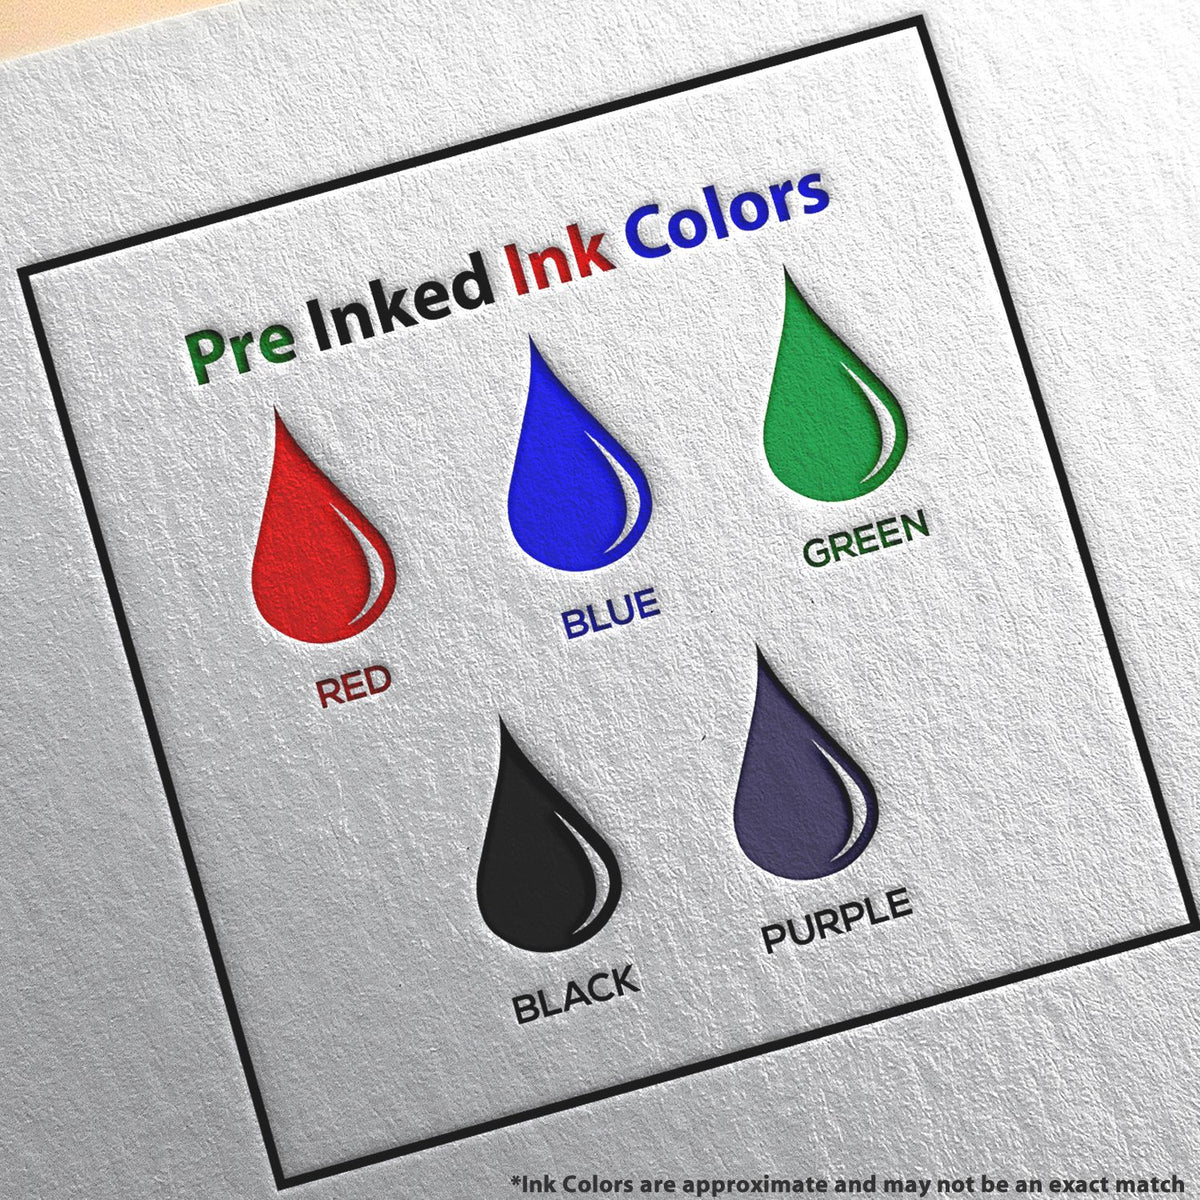 A picture showing the different ink colors or hues available for the Premium MaxLight Pre-Inked South Dakota Landscape Architectural Stamp product.